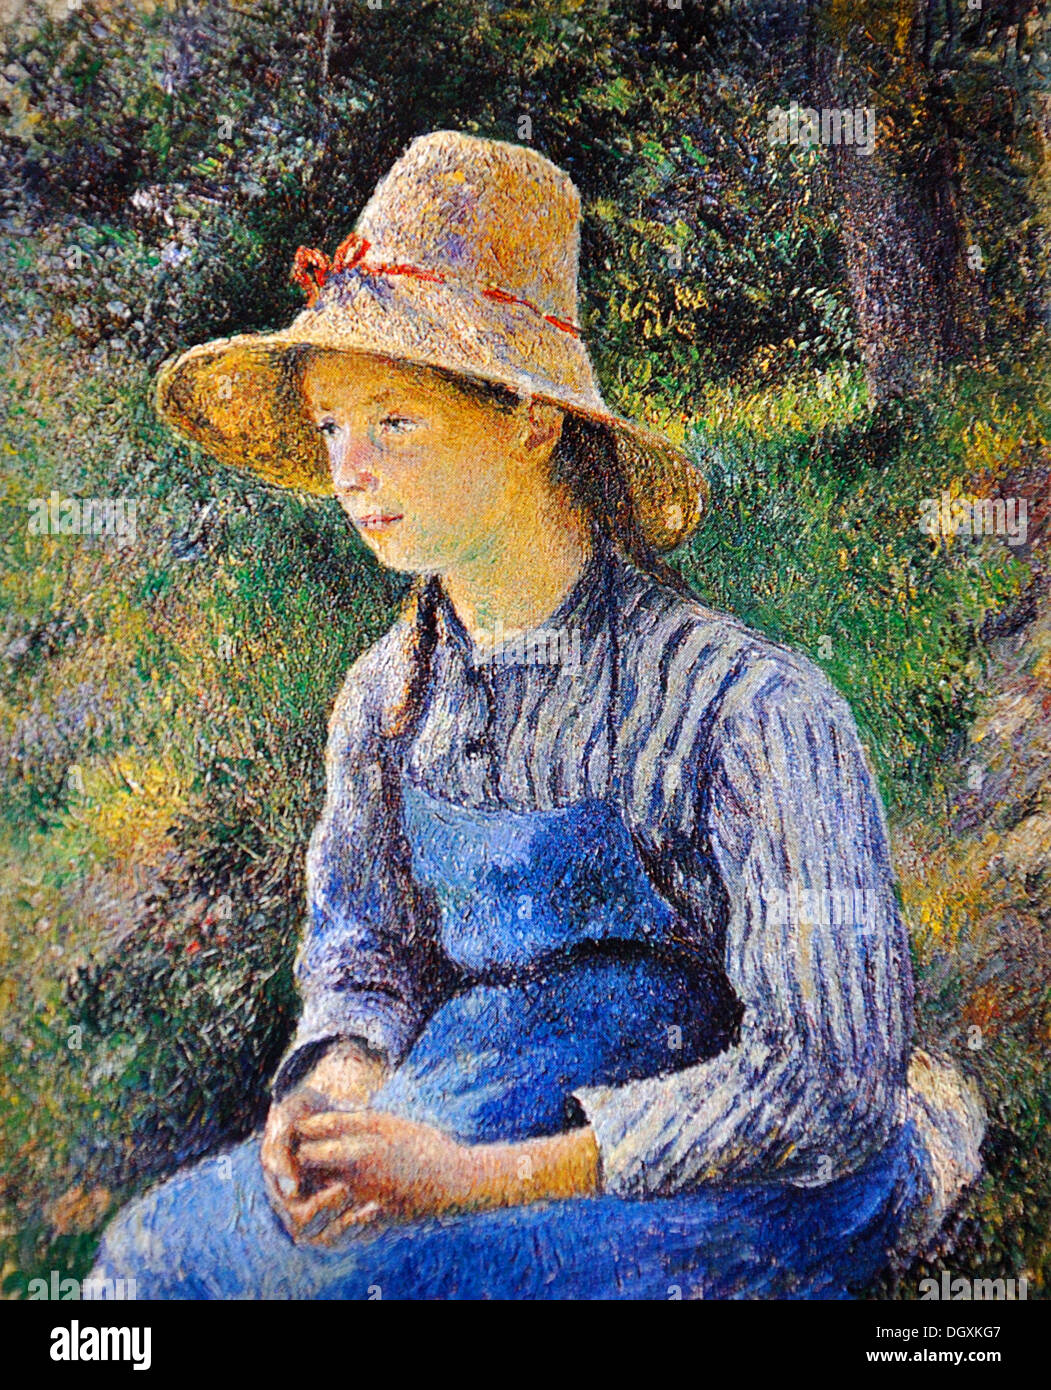 Camille Pissarro - Peasant Girl with a Straw Hat, 1889 Stock Photo